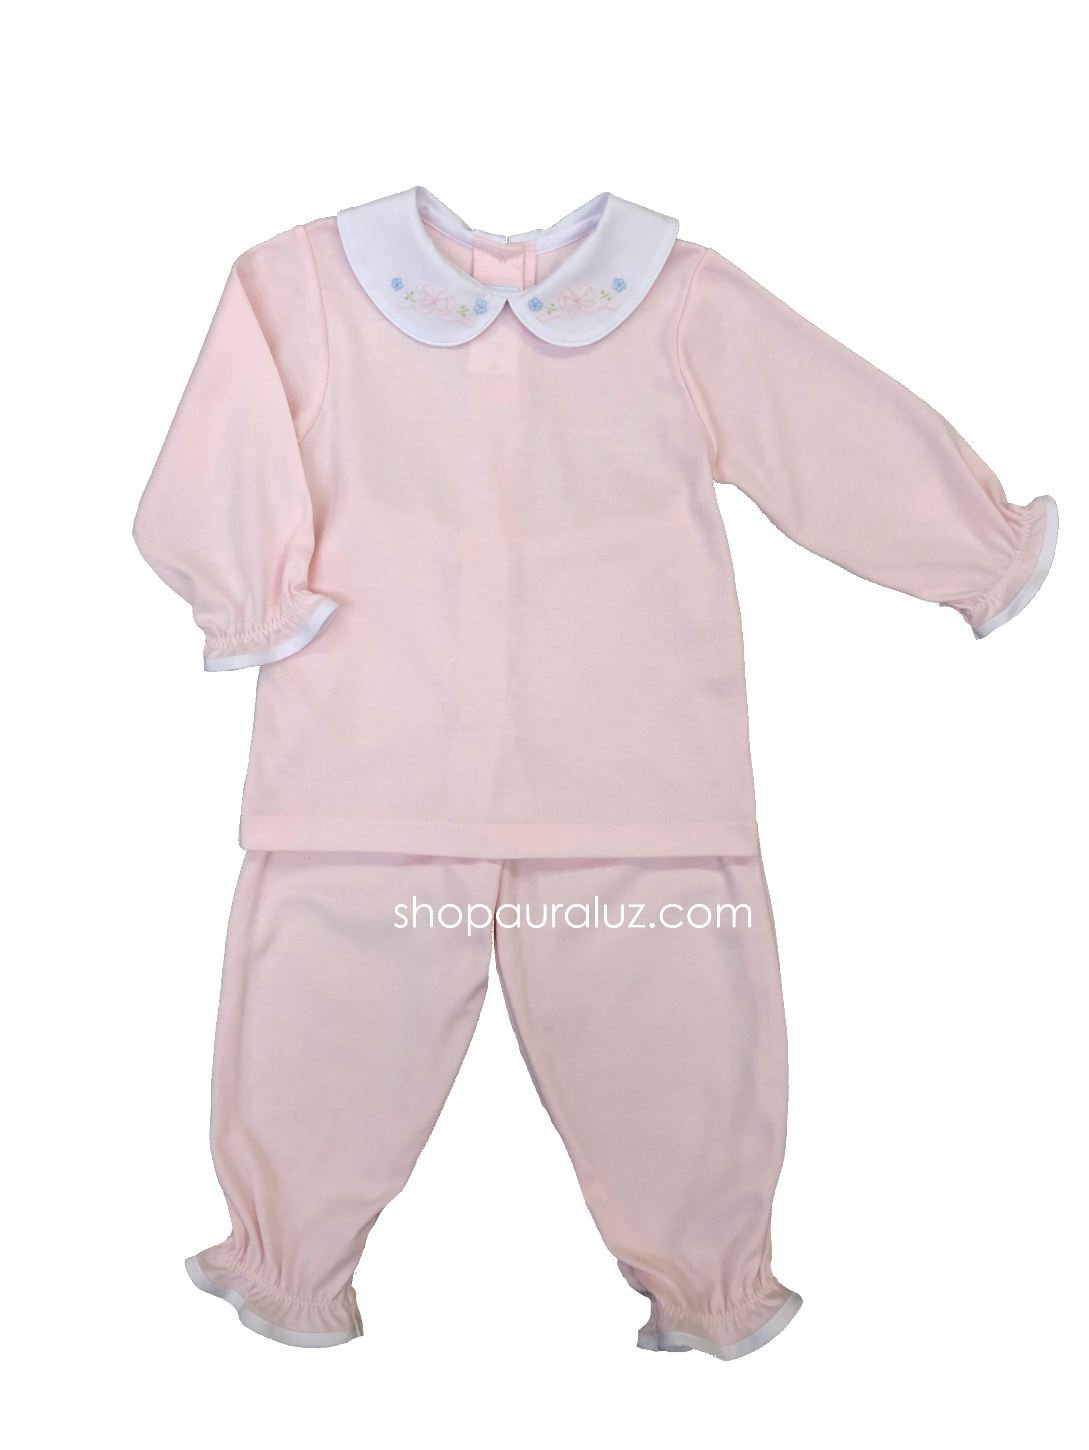 Auraluz Knit Girl 2pc l/s...Pink with p.p.collar and embroidered bows